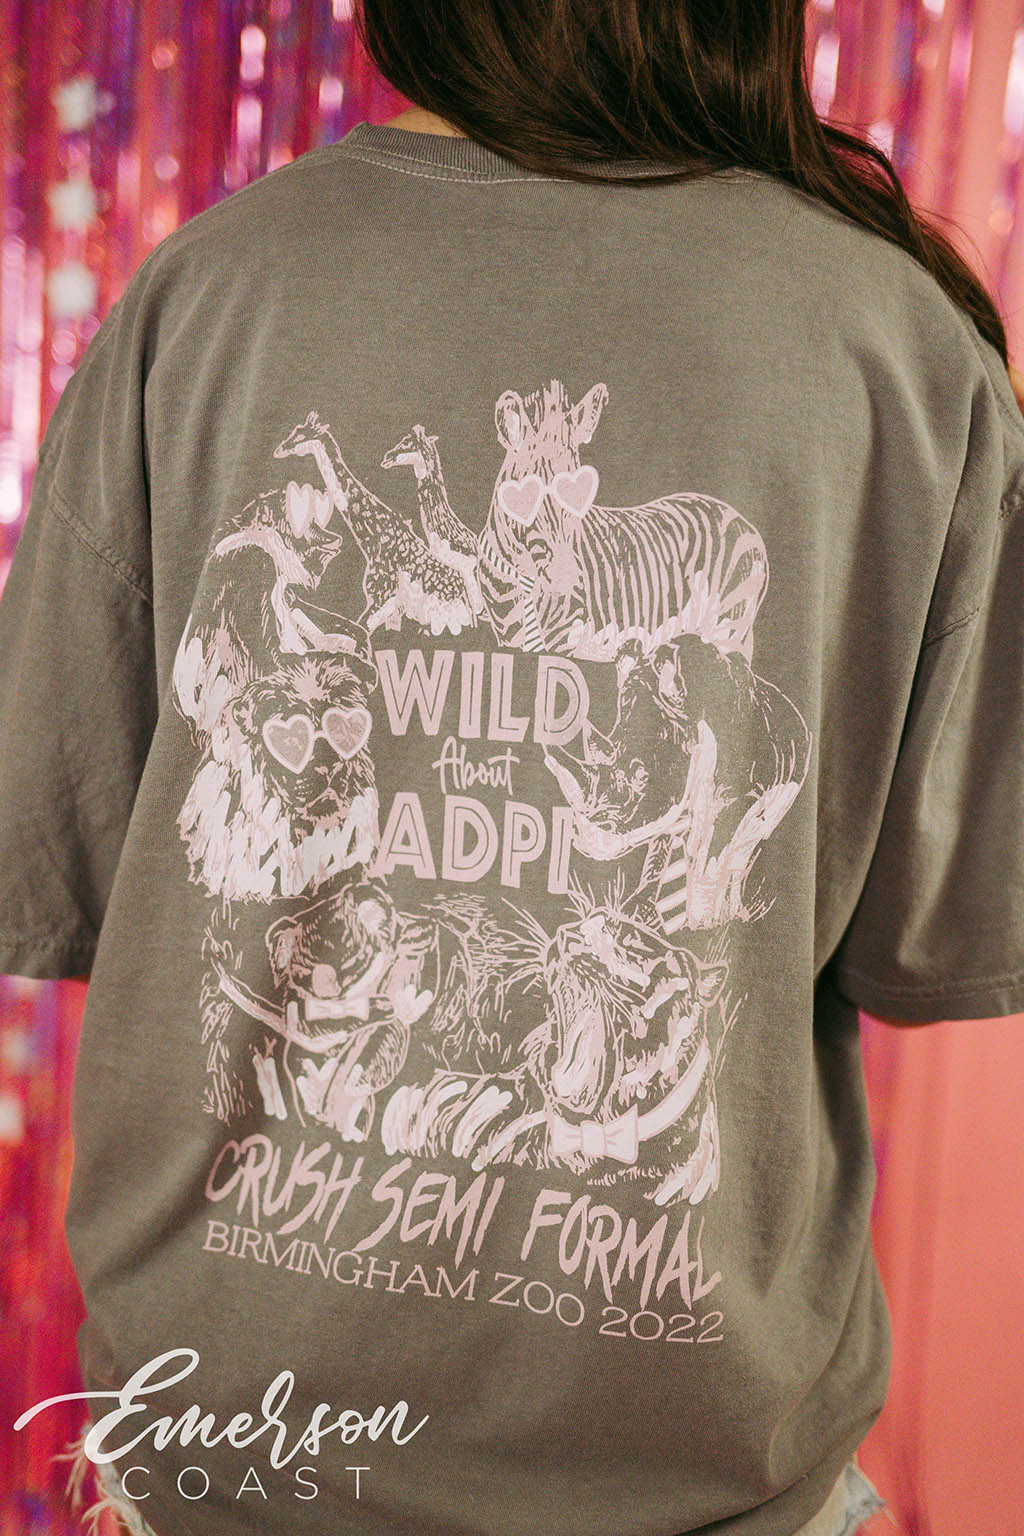 Girl wears green tshirt that reads "Wild About ADPi" and features an illustration of safari animals.